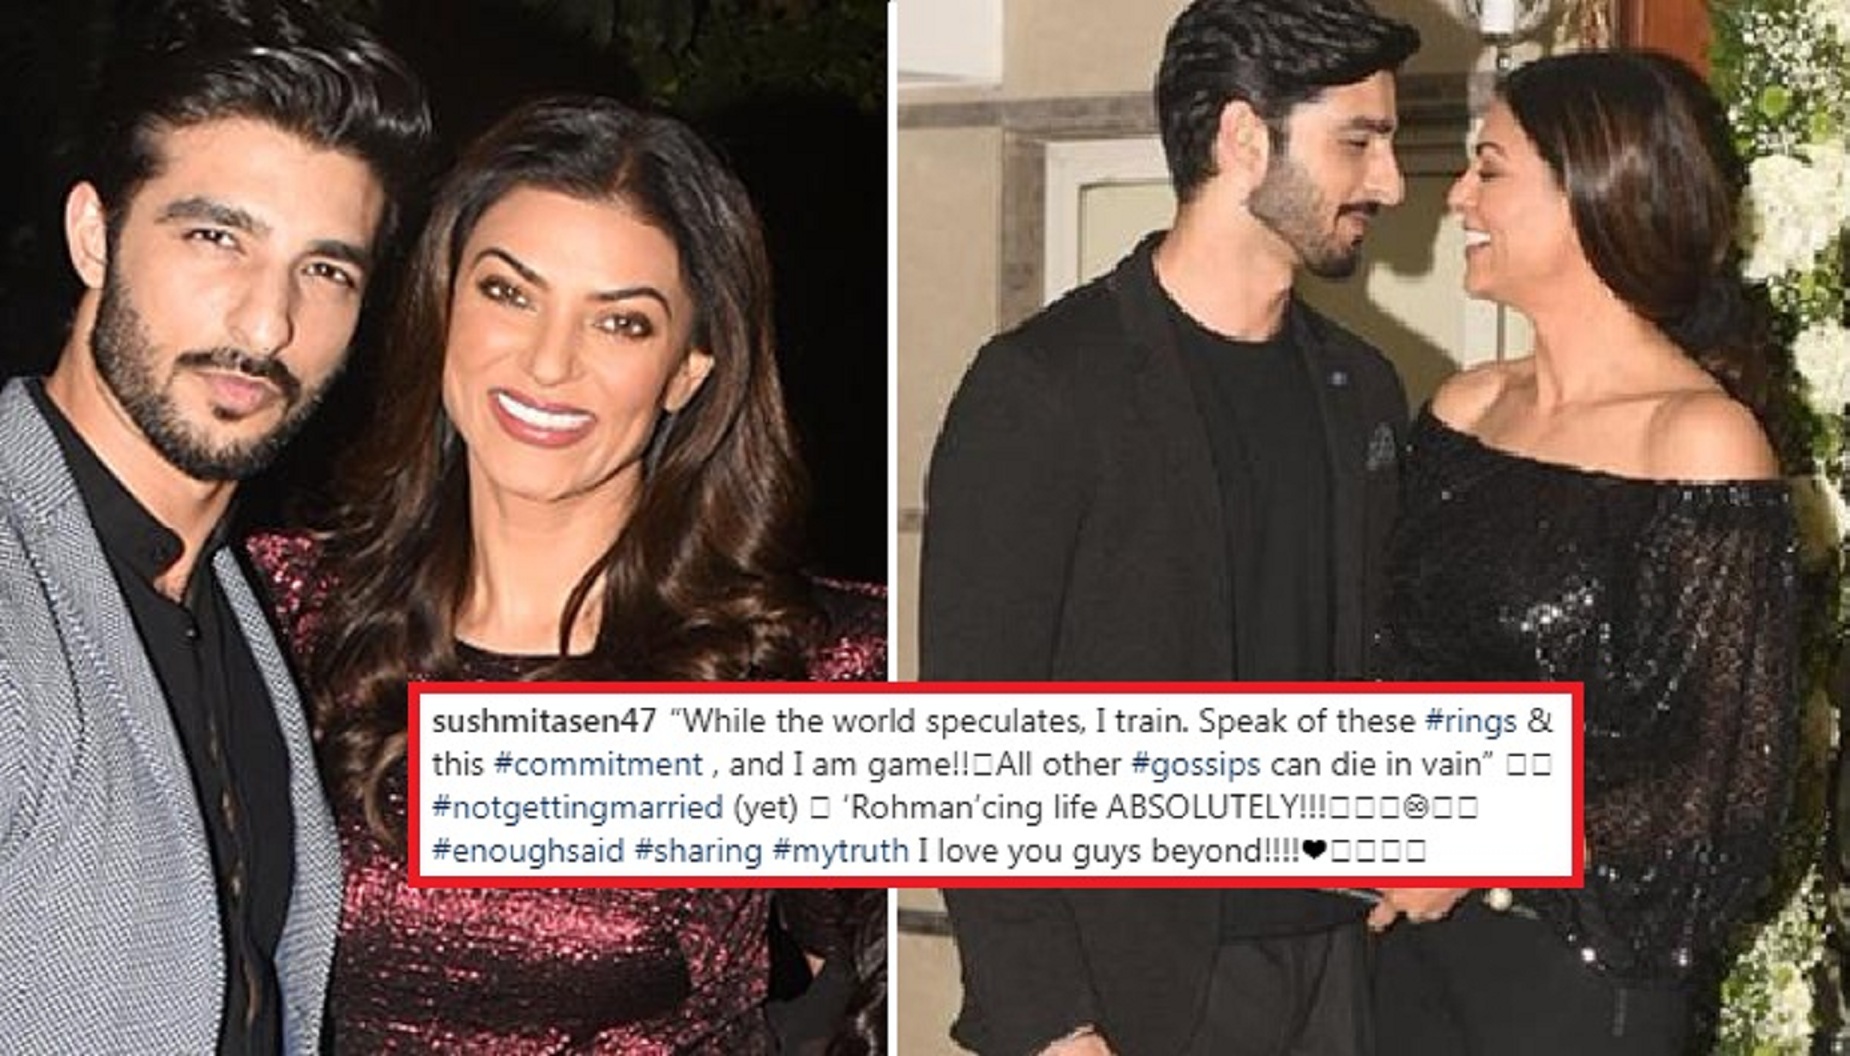 Sushmita Sen Confirms Relationship With Rohman Shawl, But There’s No Marriage On The Cards Yet!